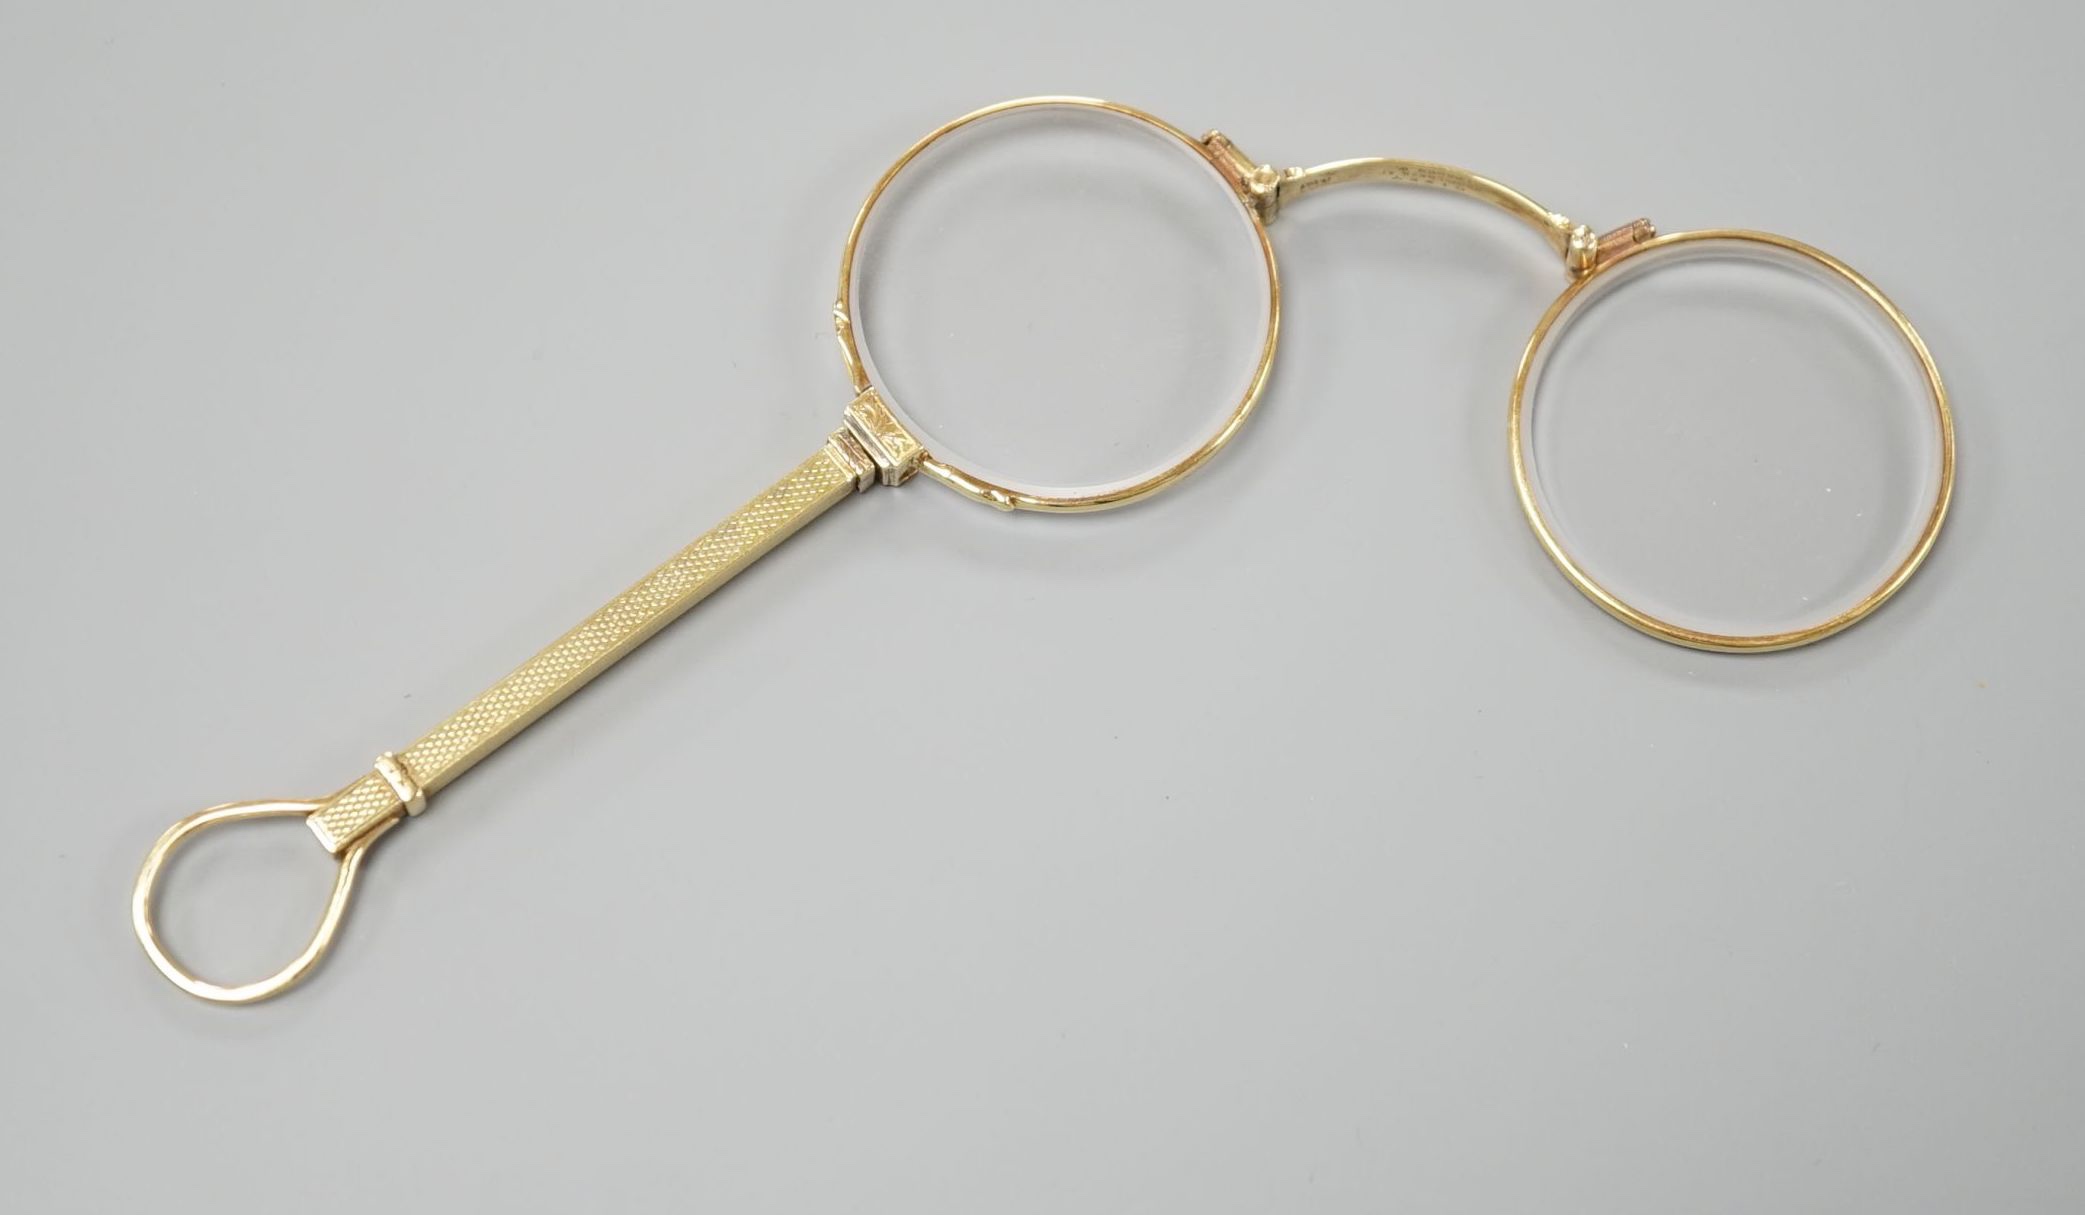 A pair of Edwardian 15ct lorgnettes, by Dixie, 20 Welbeck Street, London, with engine turned handle, 11.4cm, gross weight 28.9 grams.